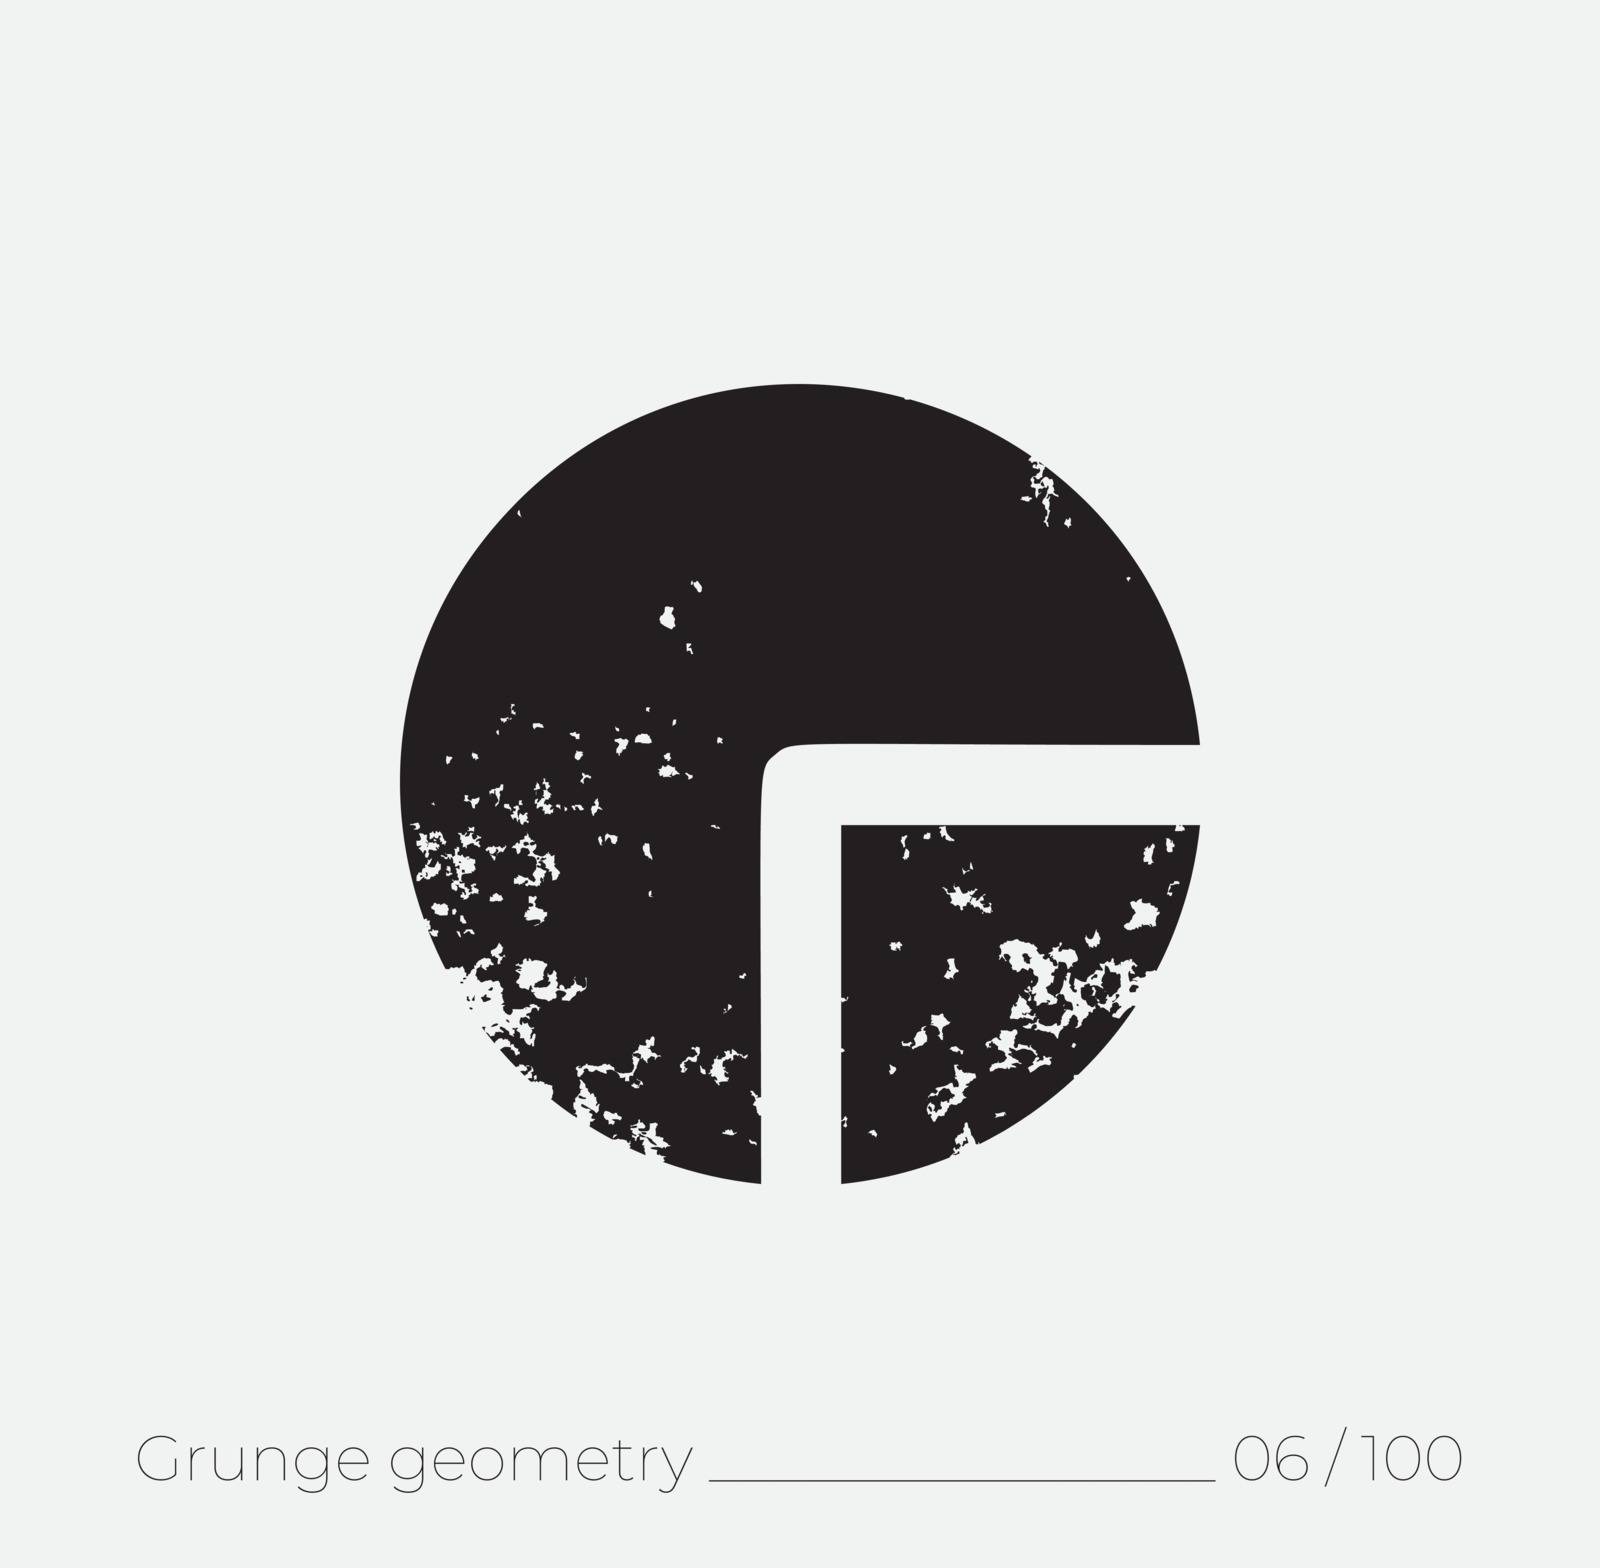 Geometric simple shape in grunge retro style by Vanzyst